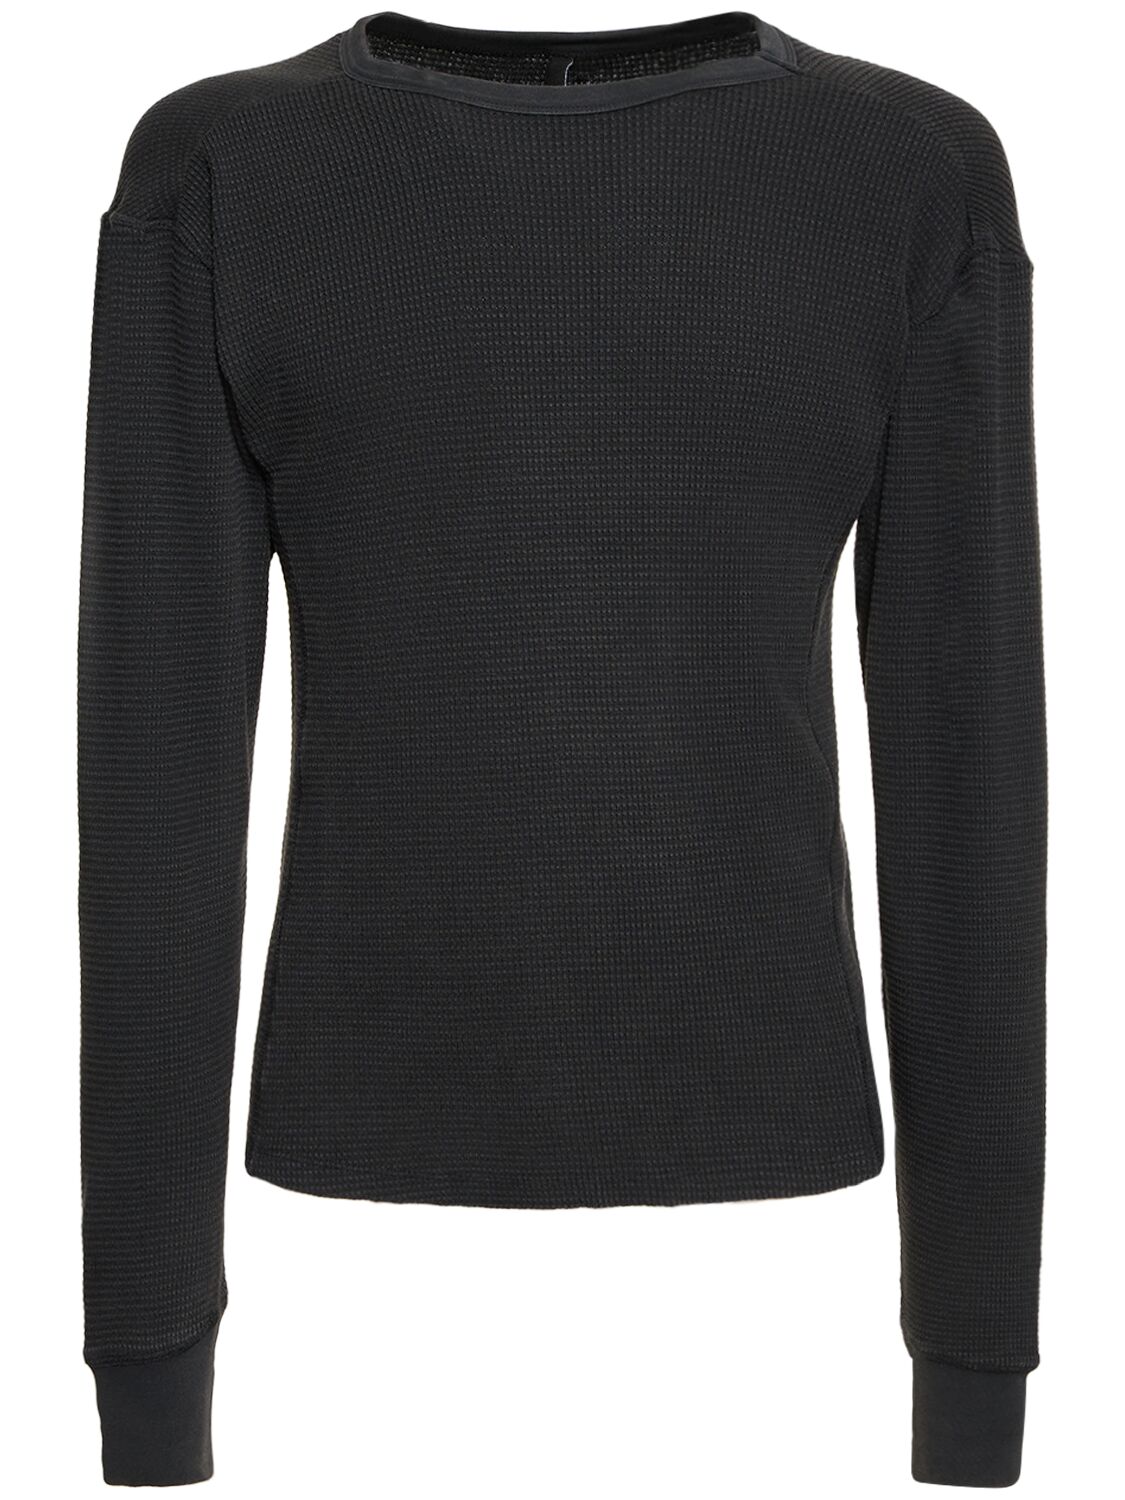 Entire Studios Washed Black Thermal Long Sleeve T-shirt